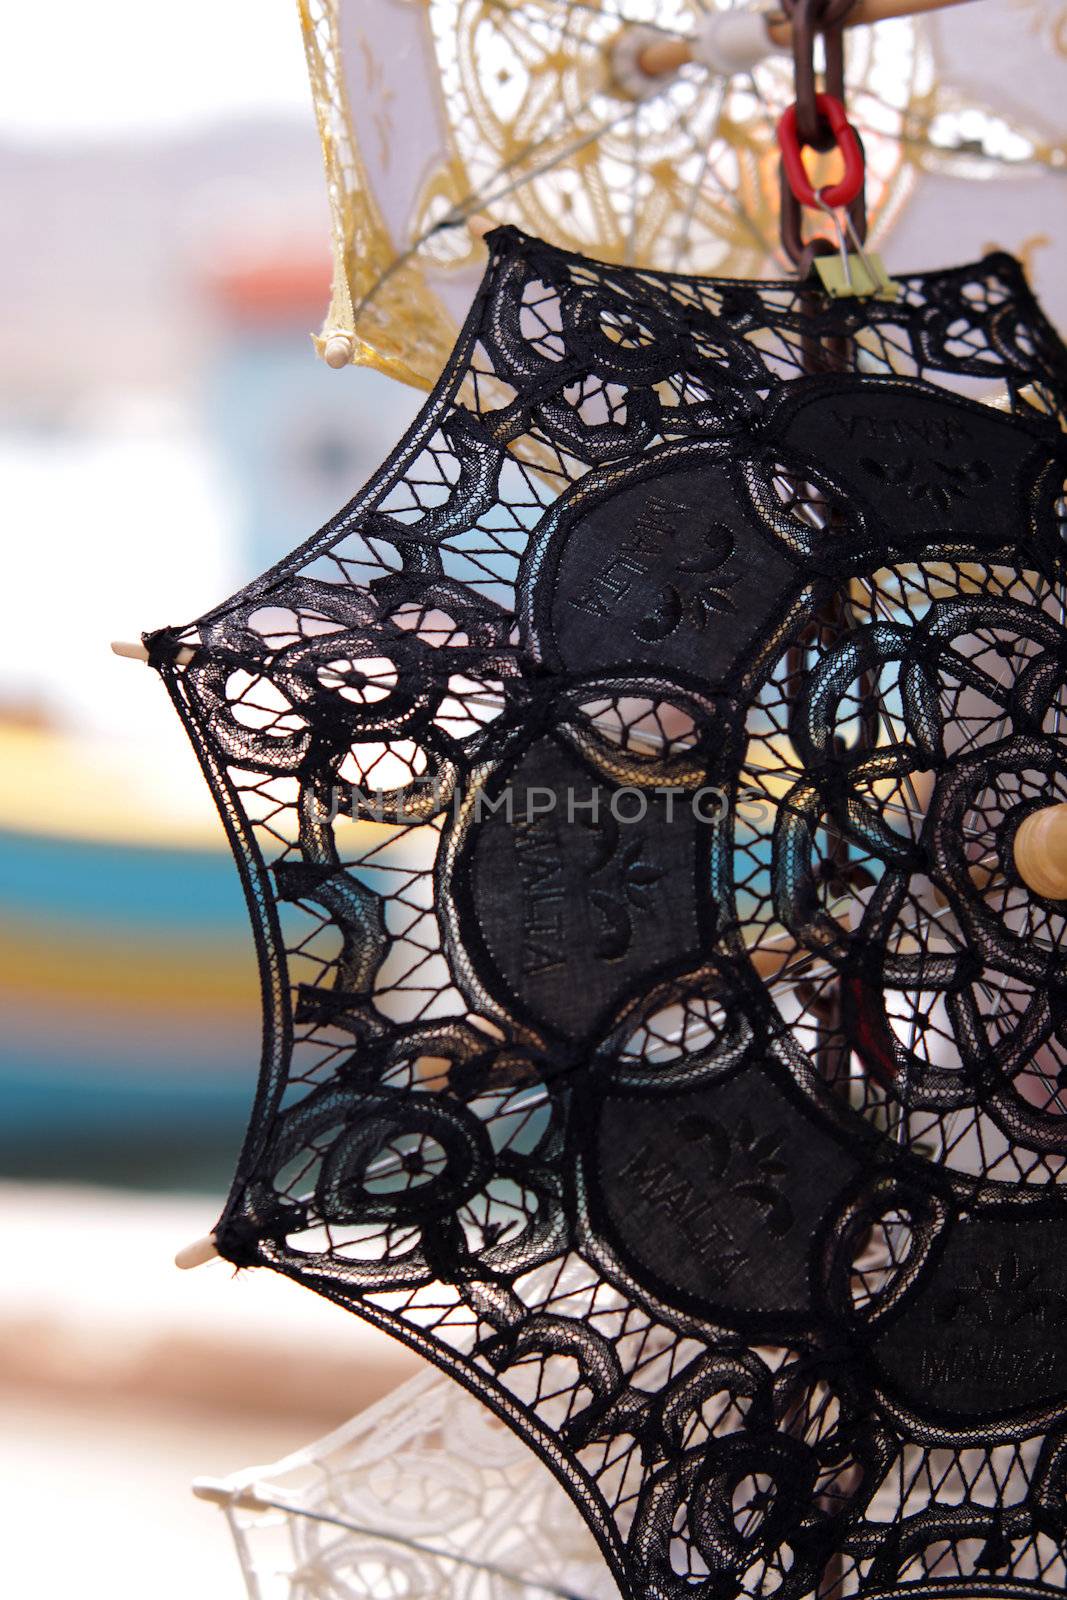 Detail of a black decorative lace umbrella found in a Maltese souvenir market held in Marsaxlokk harbour. Background blurred out. Vertical photo